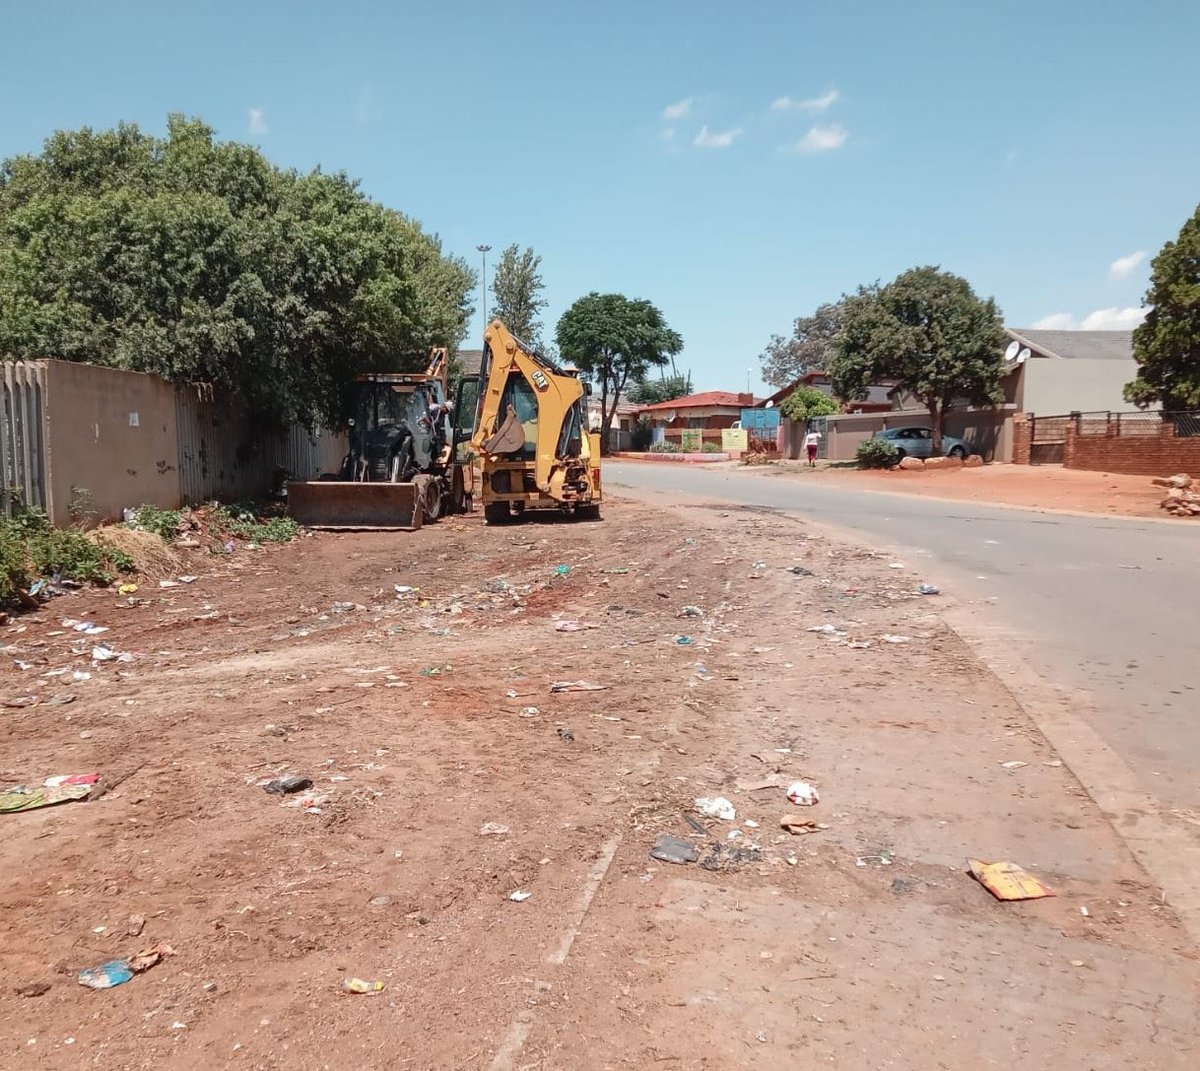 ♦️In Pictures ♦️ The city remains vigilant in its efforts to combat illegal dumping. Today, we cleared illegal dumping near Ikusasa Comprehensive School in Mqansa, in Thembisa. Let's keep our communities clean and free from health hazards! #CleanYourKasieManjeNamhlanje